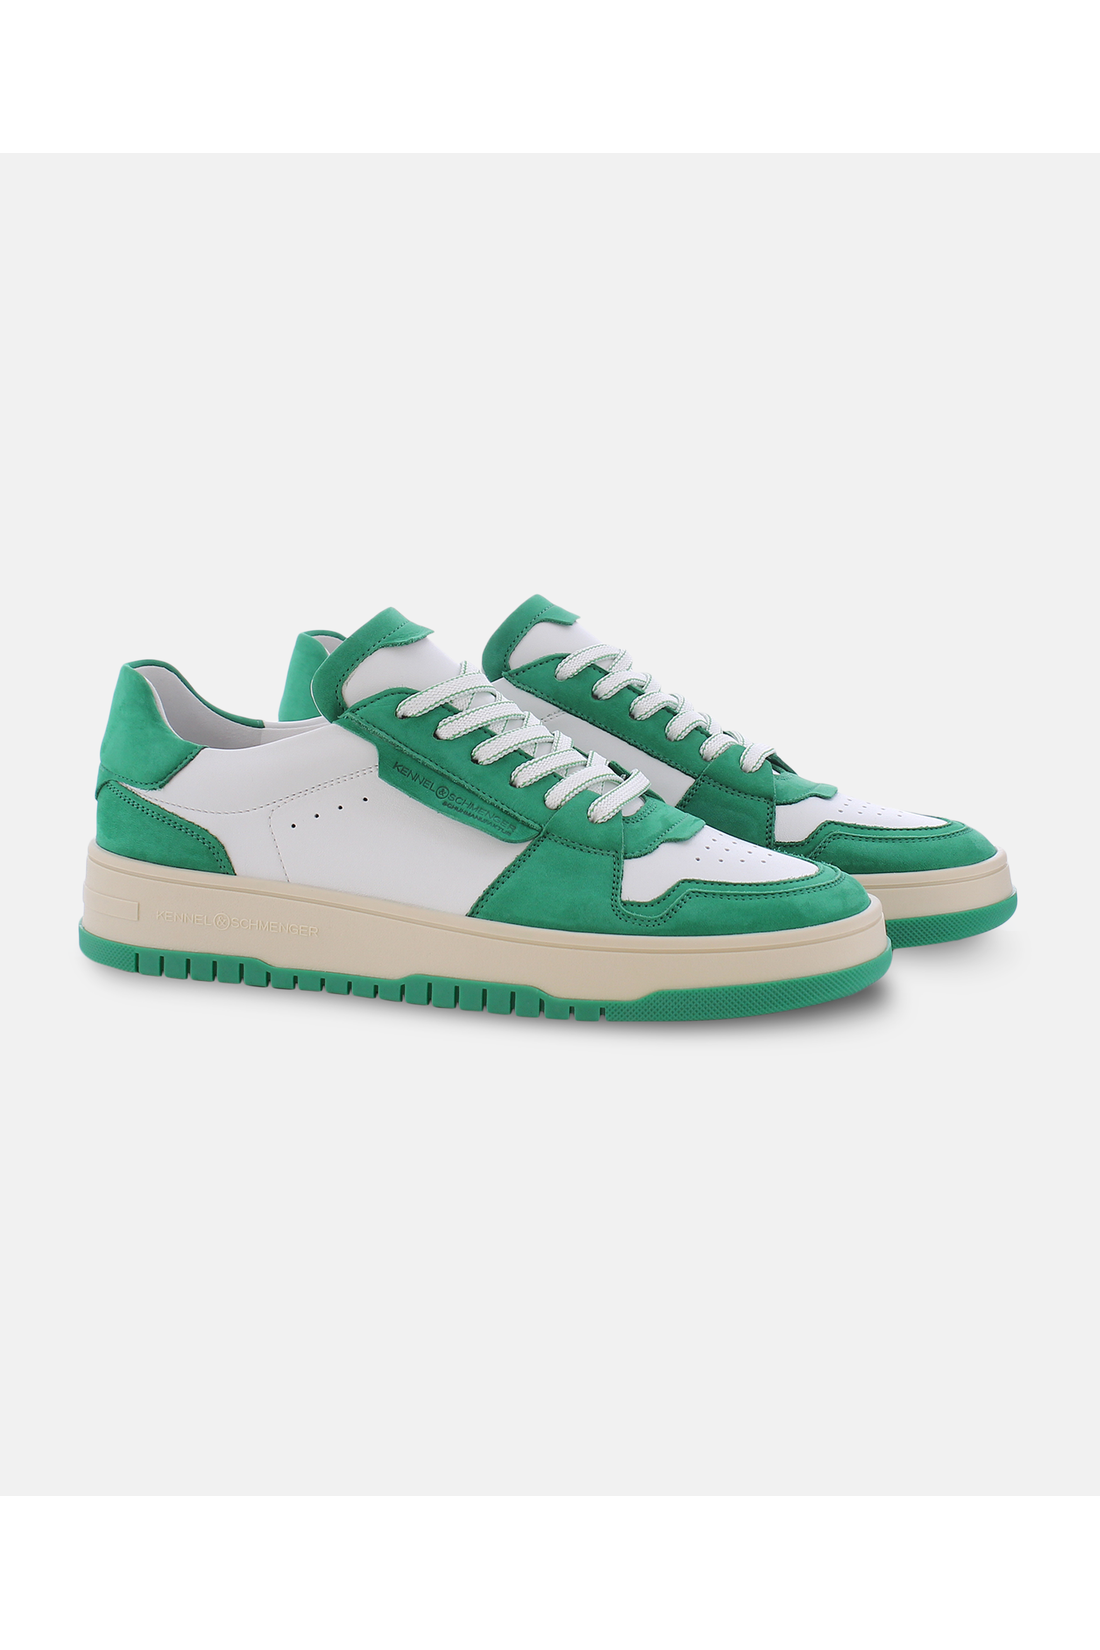 Kennel-Schmenger-OUTLET-SALE-DRIFT-Sneakers-2_5-35-Grun-ARCHIVE-COLLECTION.png